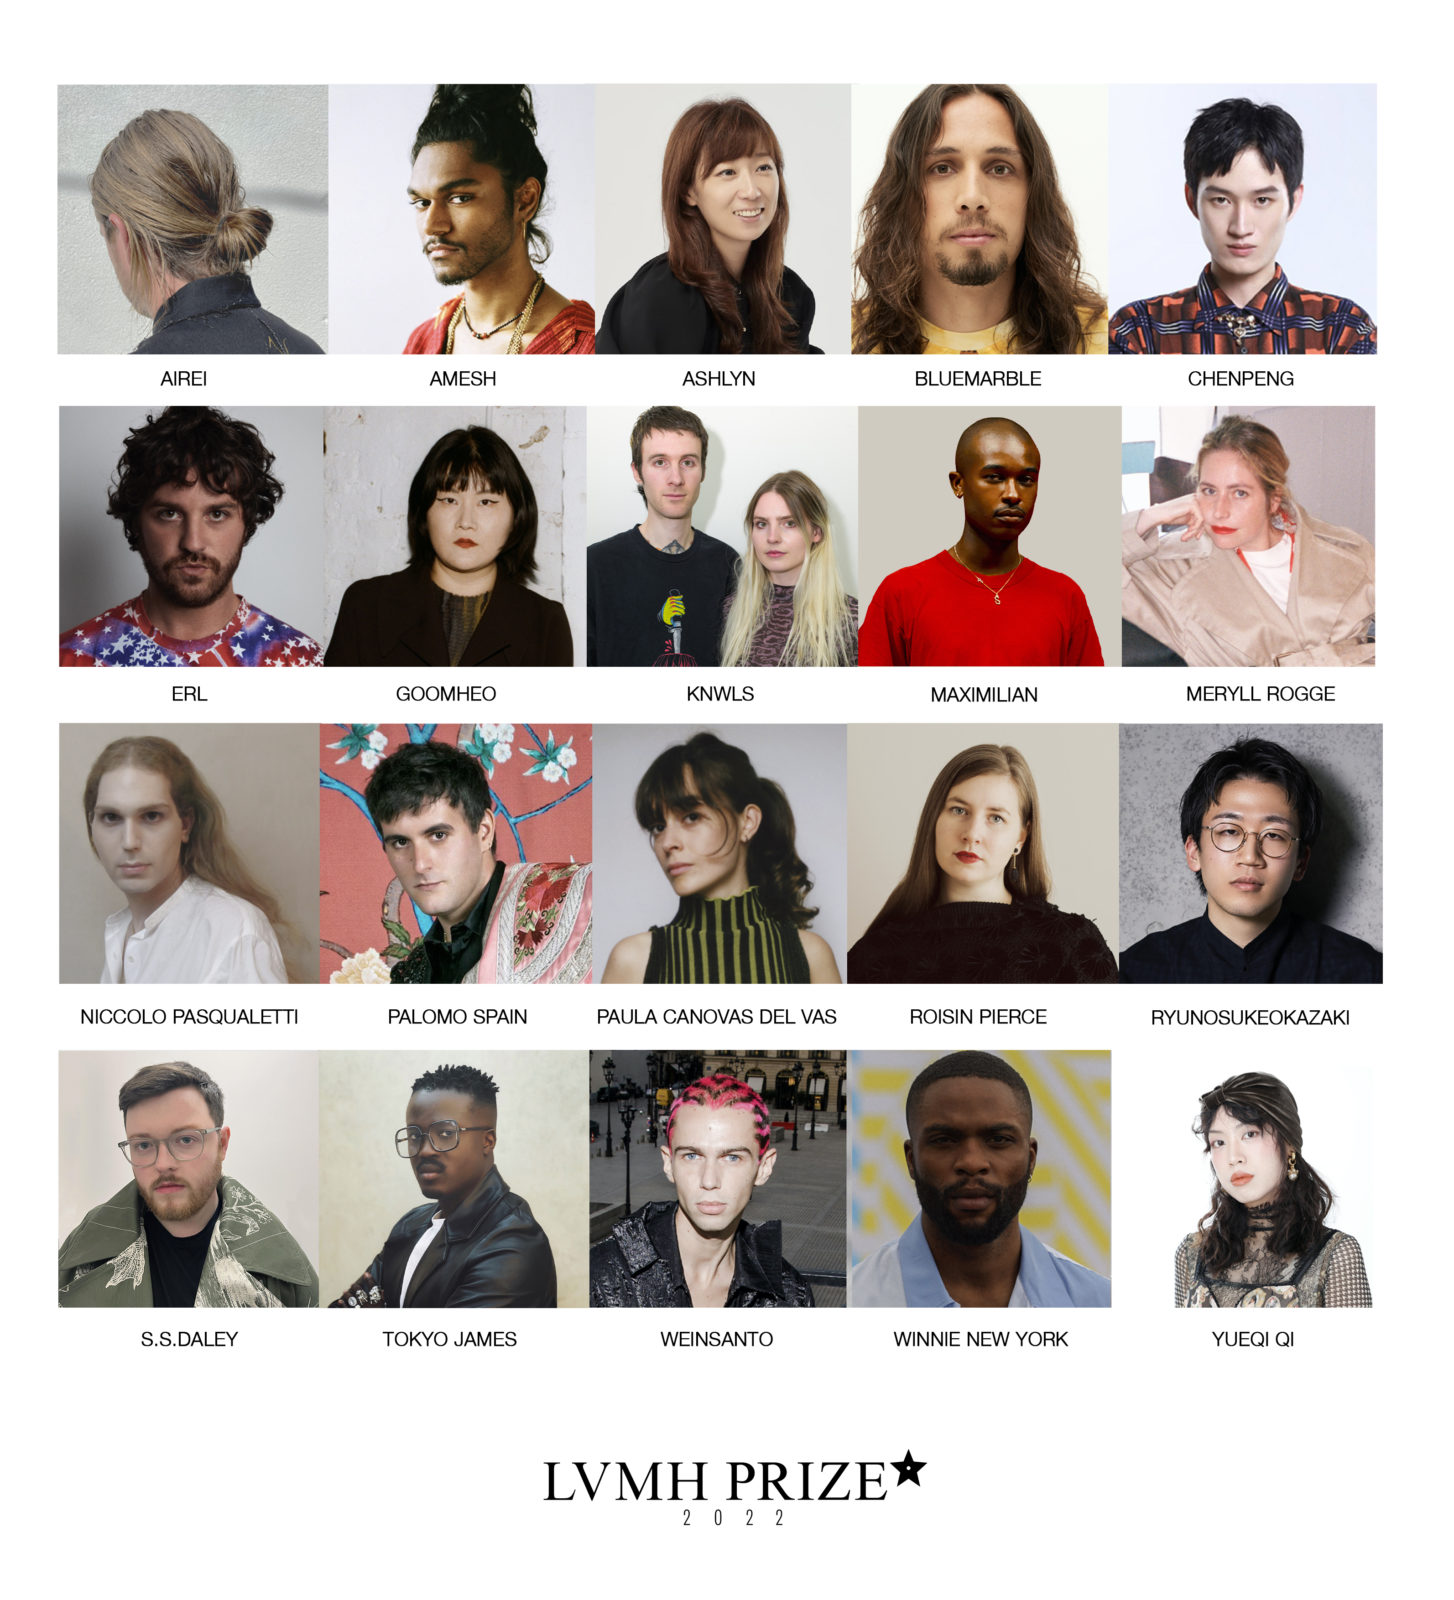 Wales Bonner Is the Winner of the 2016 LVMH Prize - Fashionista